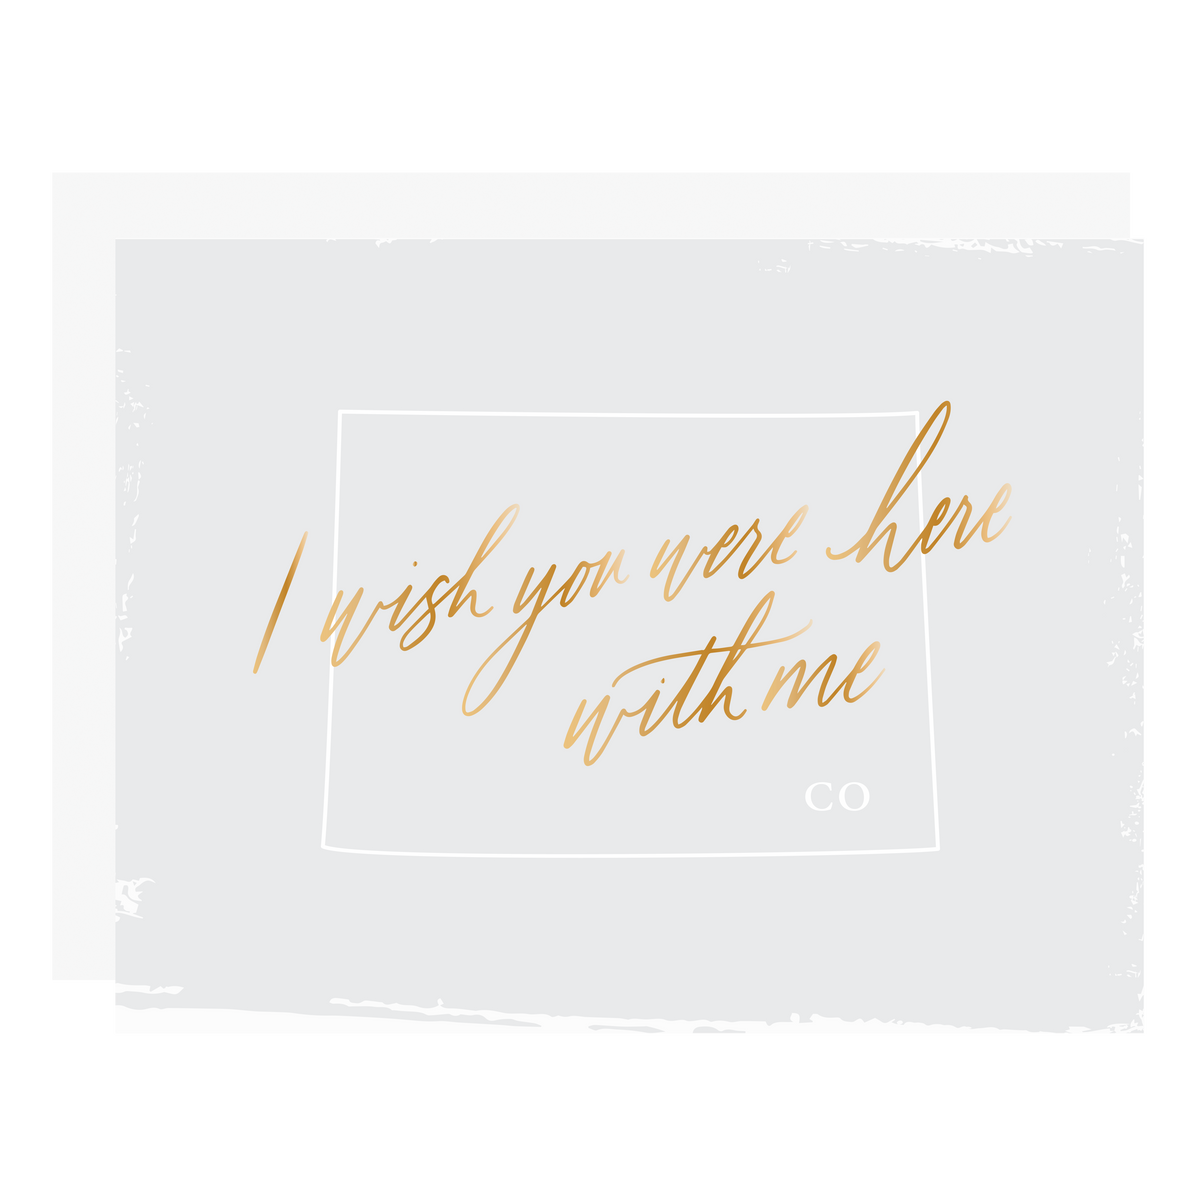 &quot;Wish You Were Here With Me - Colorado&quot;, letterpress printed by hand with gold foil. 